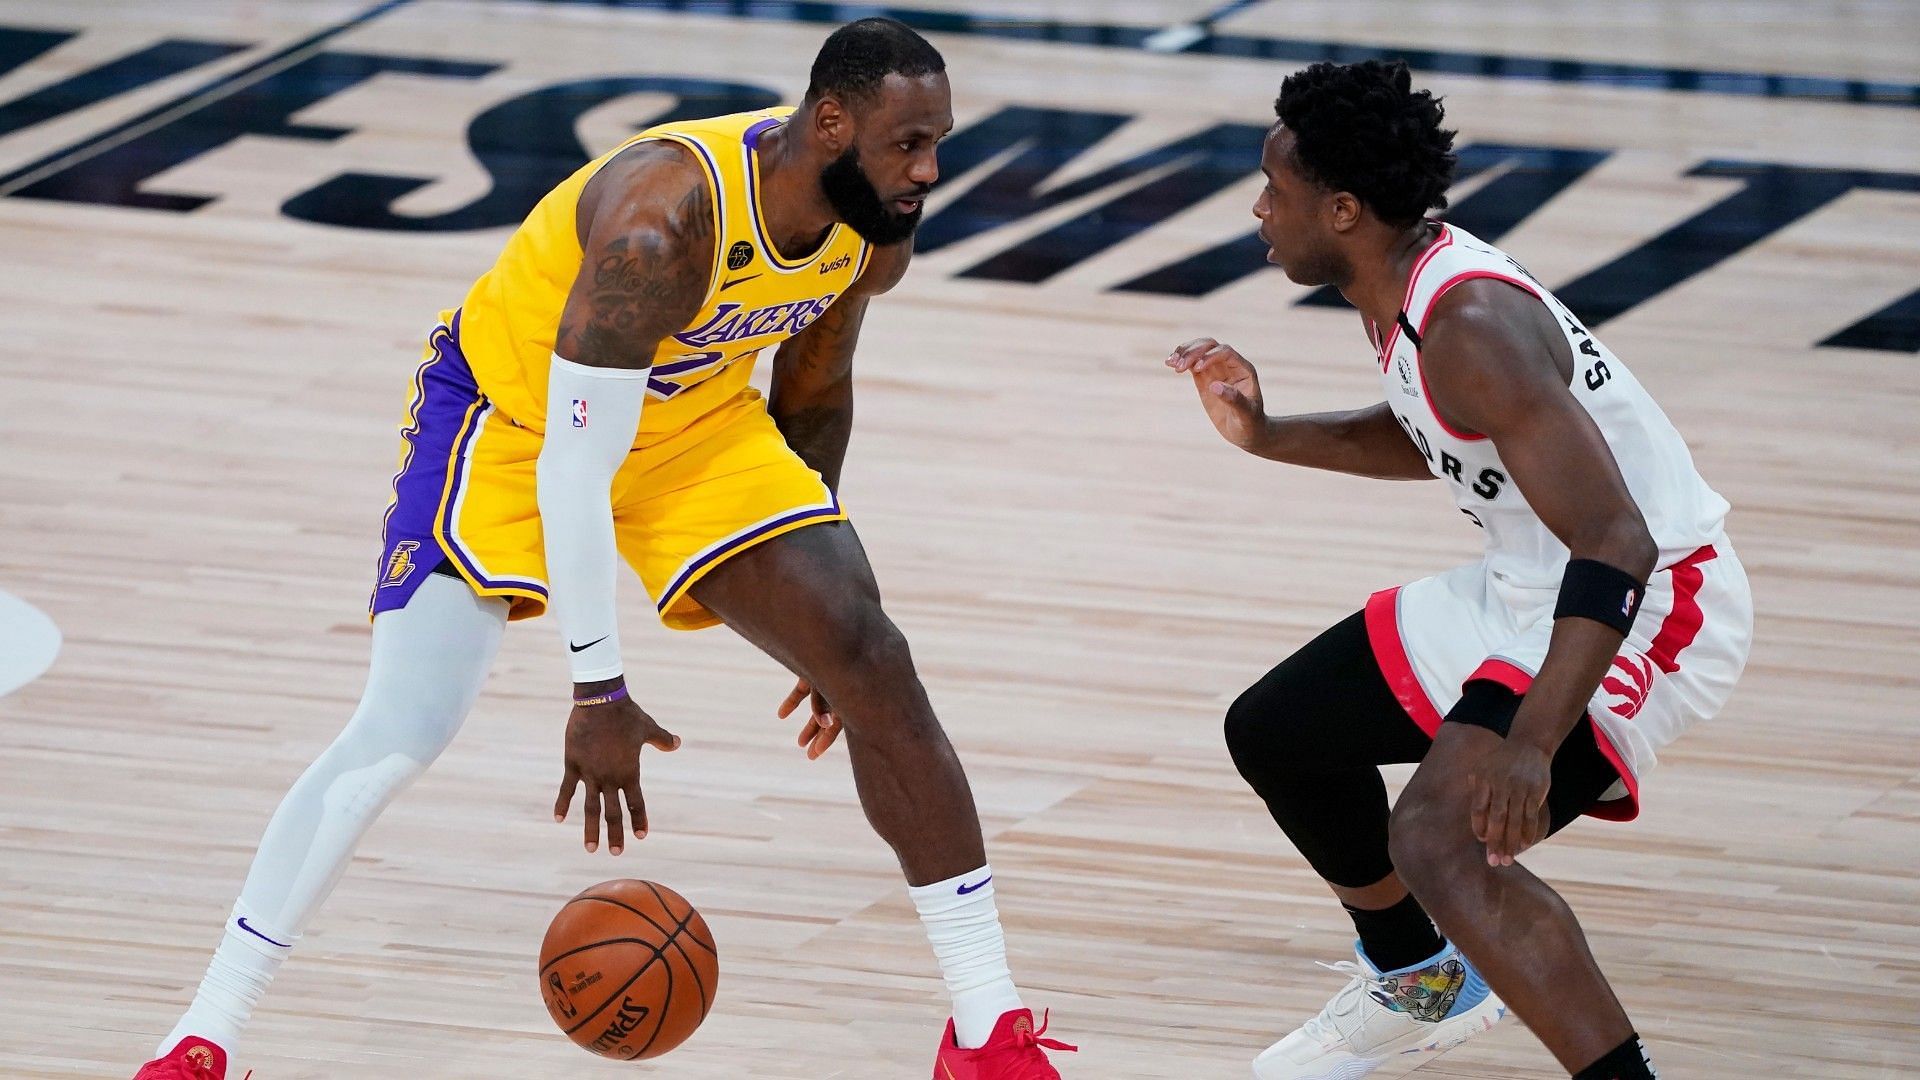 The visiting Toronto Raptors will have a close look at the LA Lakers for the first time this season. [Photo: NBA.com]